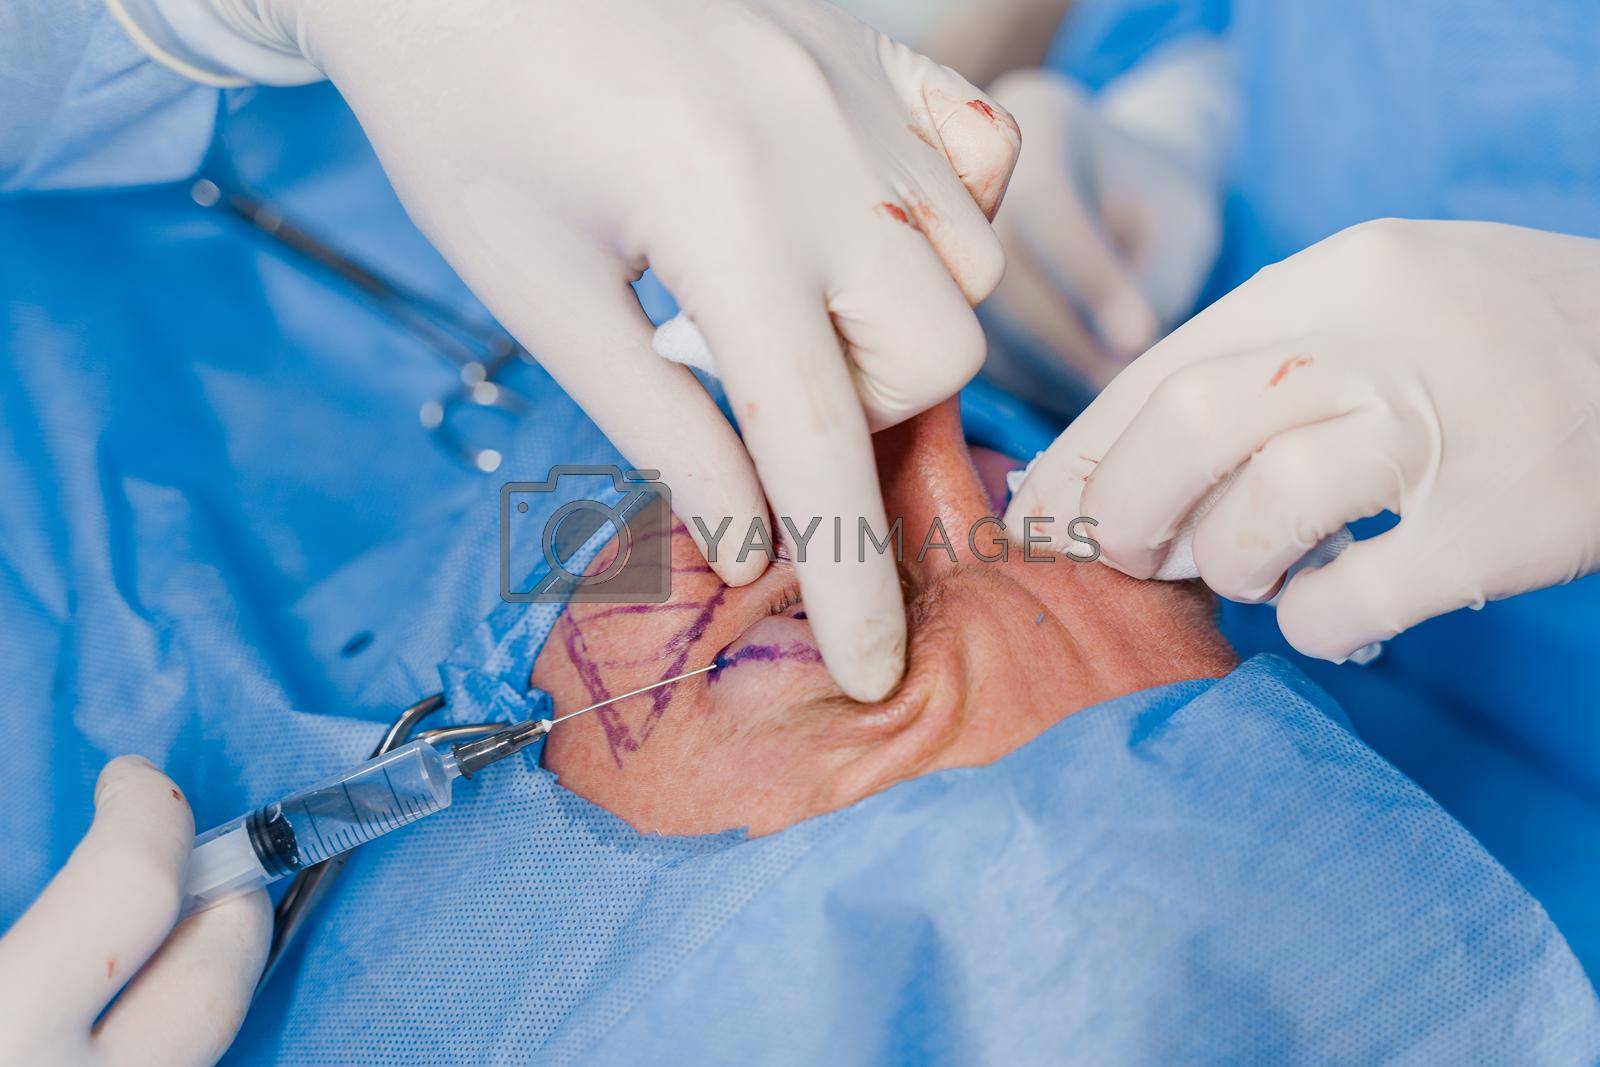 Royalty free image of Close-up anesthesia before blepharoplasty and lipofilling plastic surgery operation for modifying the eye region of the face in medical clinic. by Rabizo